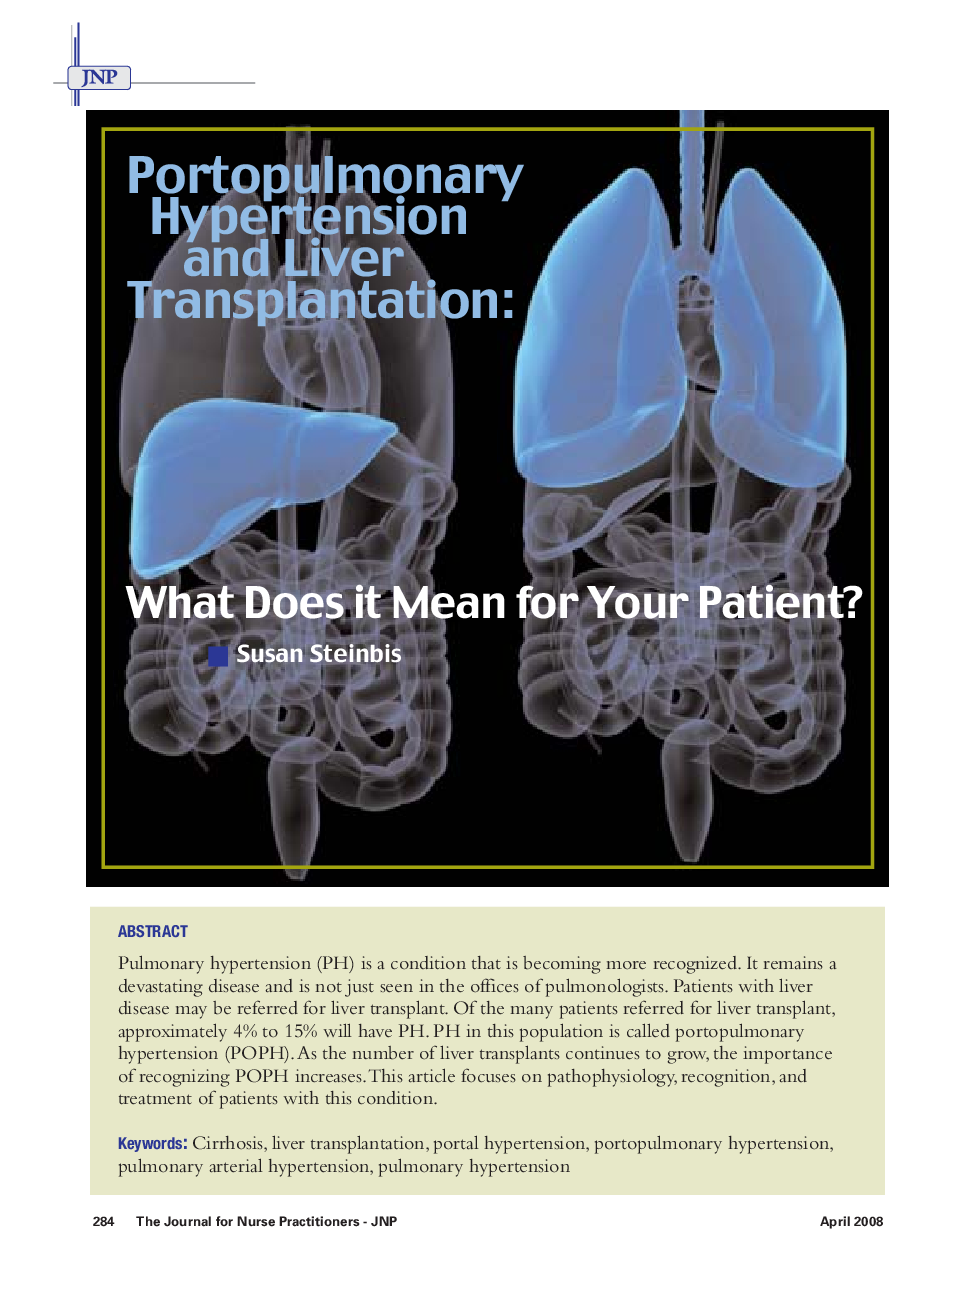 Portopulmonary Hypertension and Liver Transplantation: What Does it Mean for Your Patient?